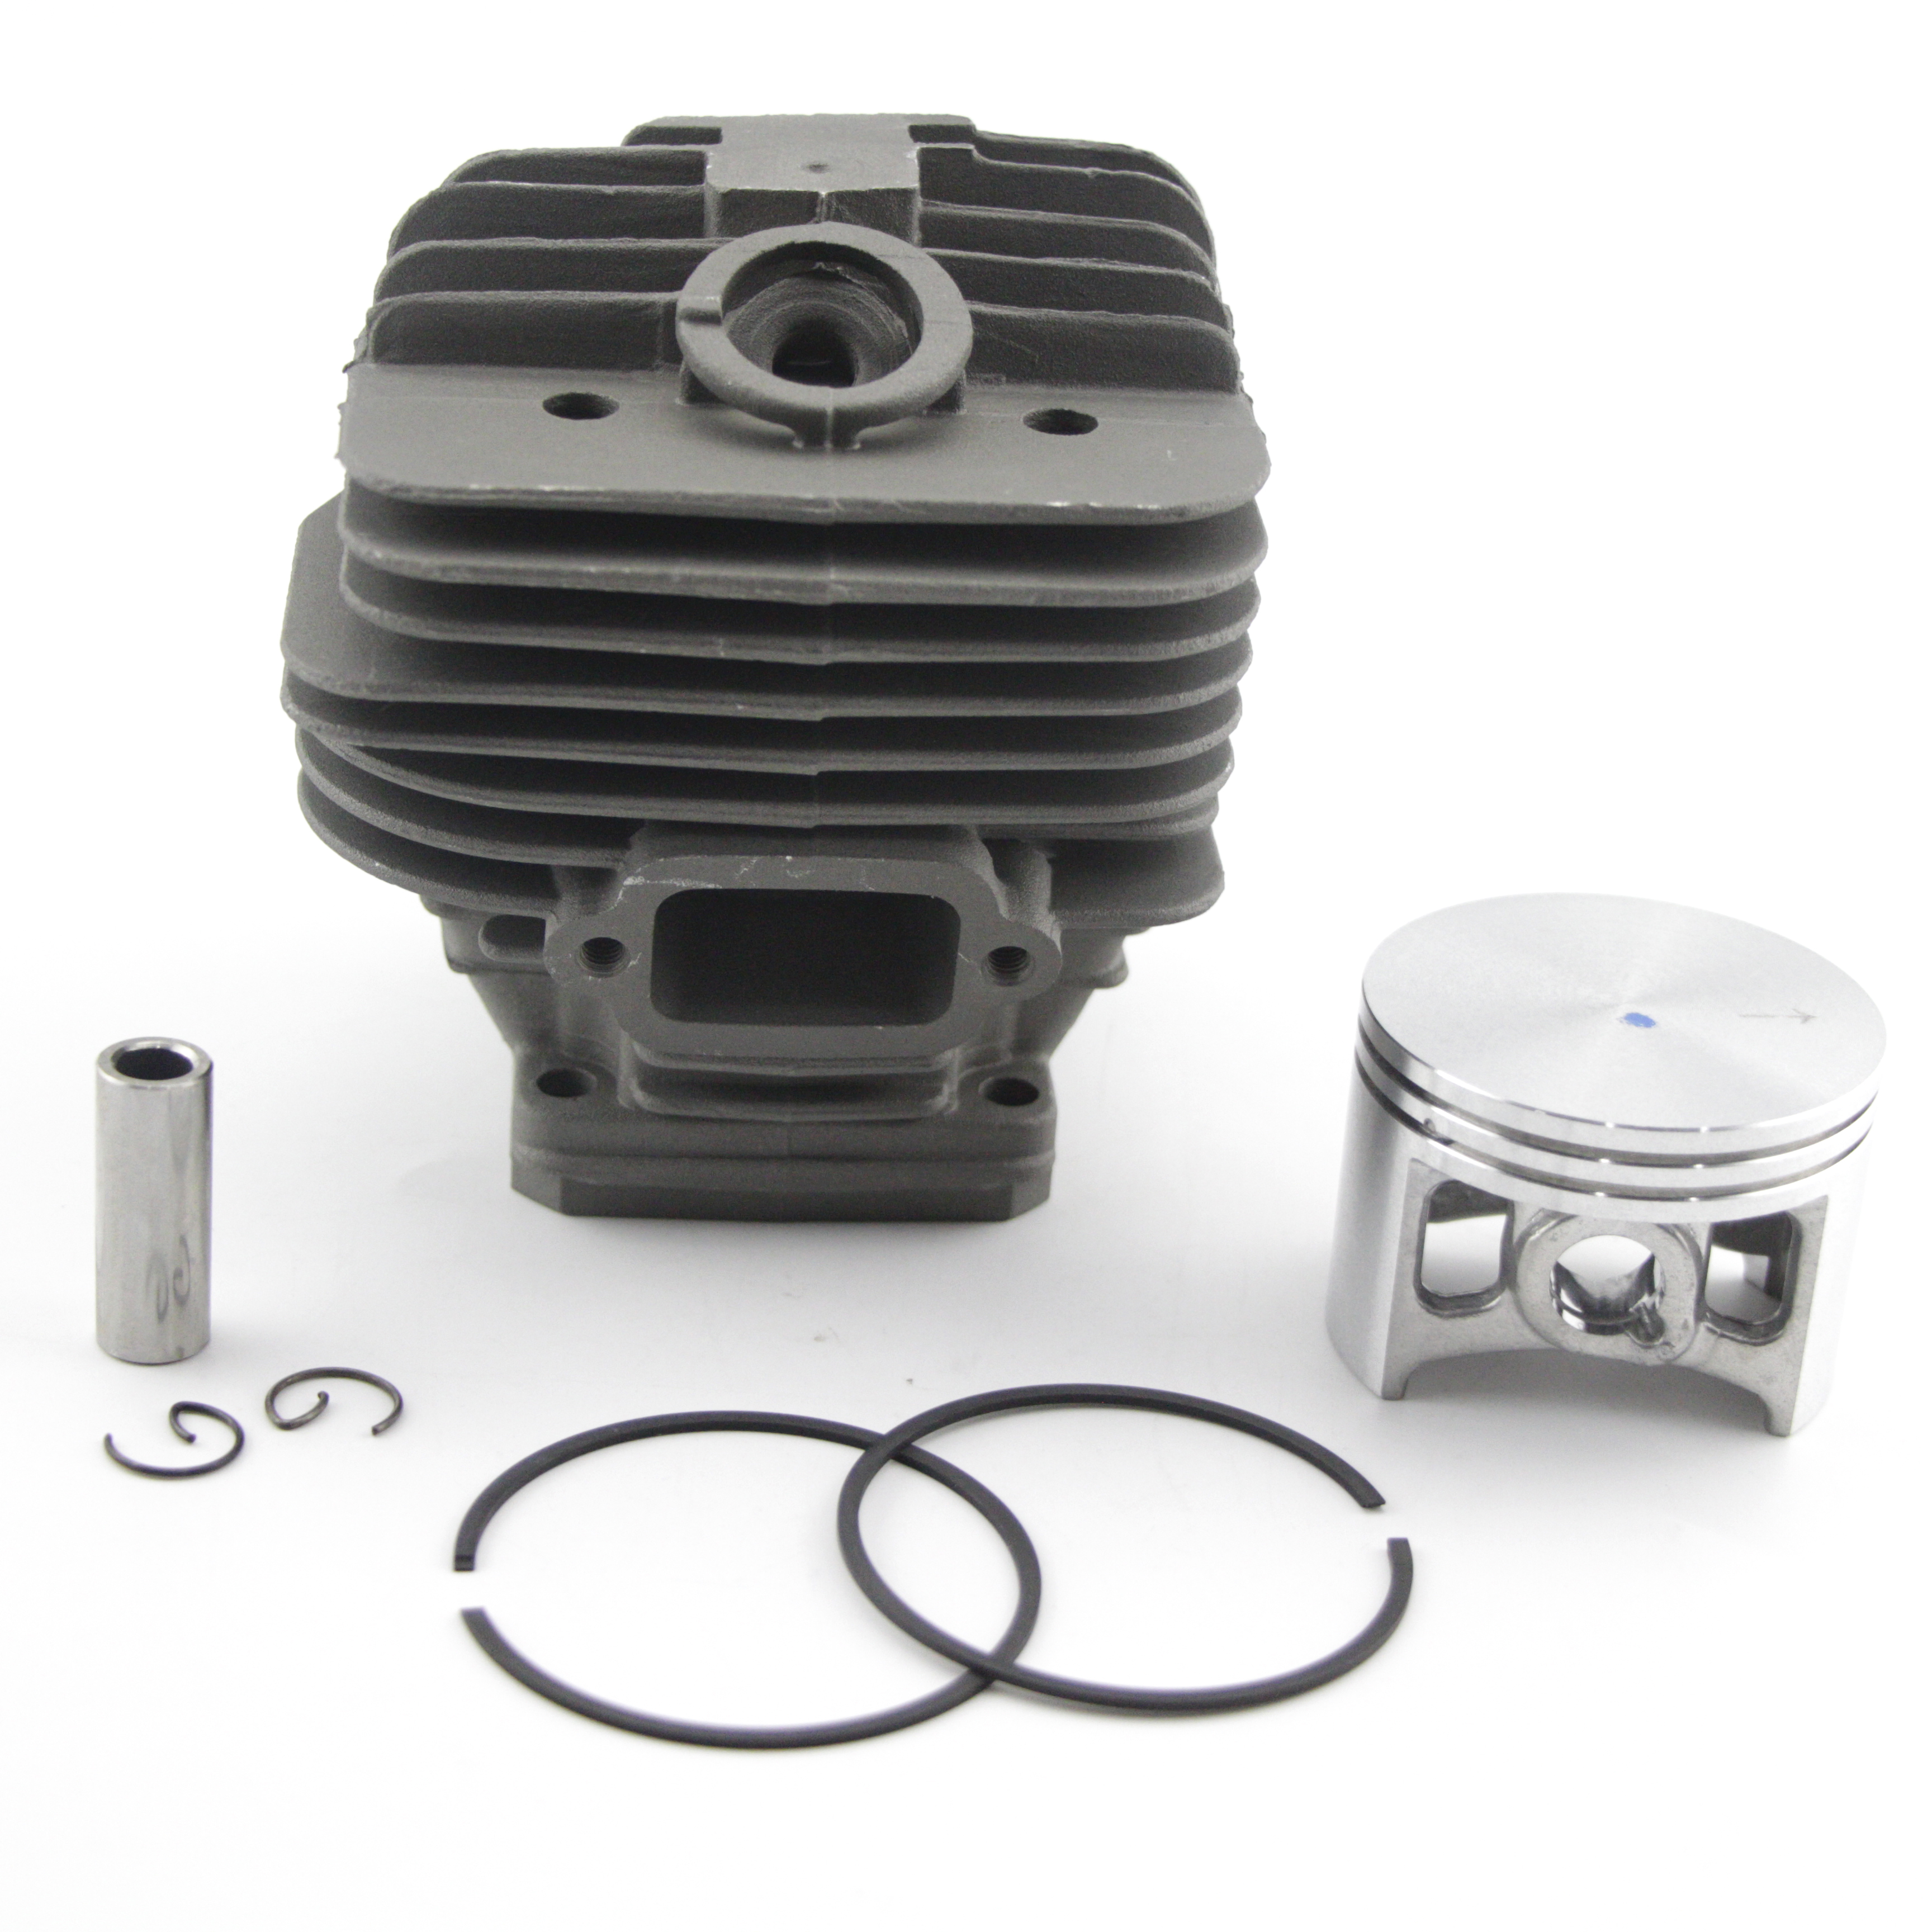 56mm Big Bore Cylinder Piston Overhaul Kit For Stihl MS650 MS640 064 Chainsaws 